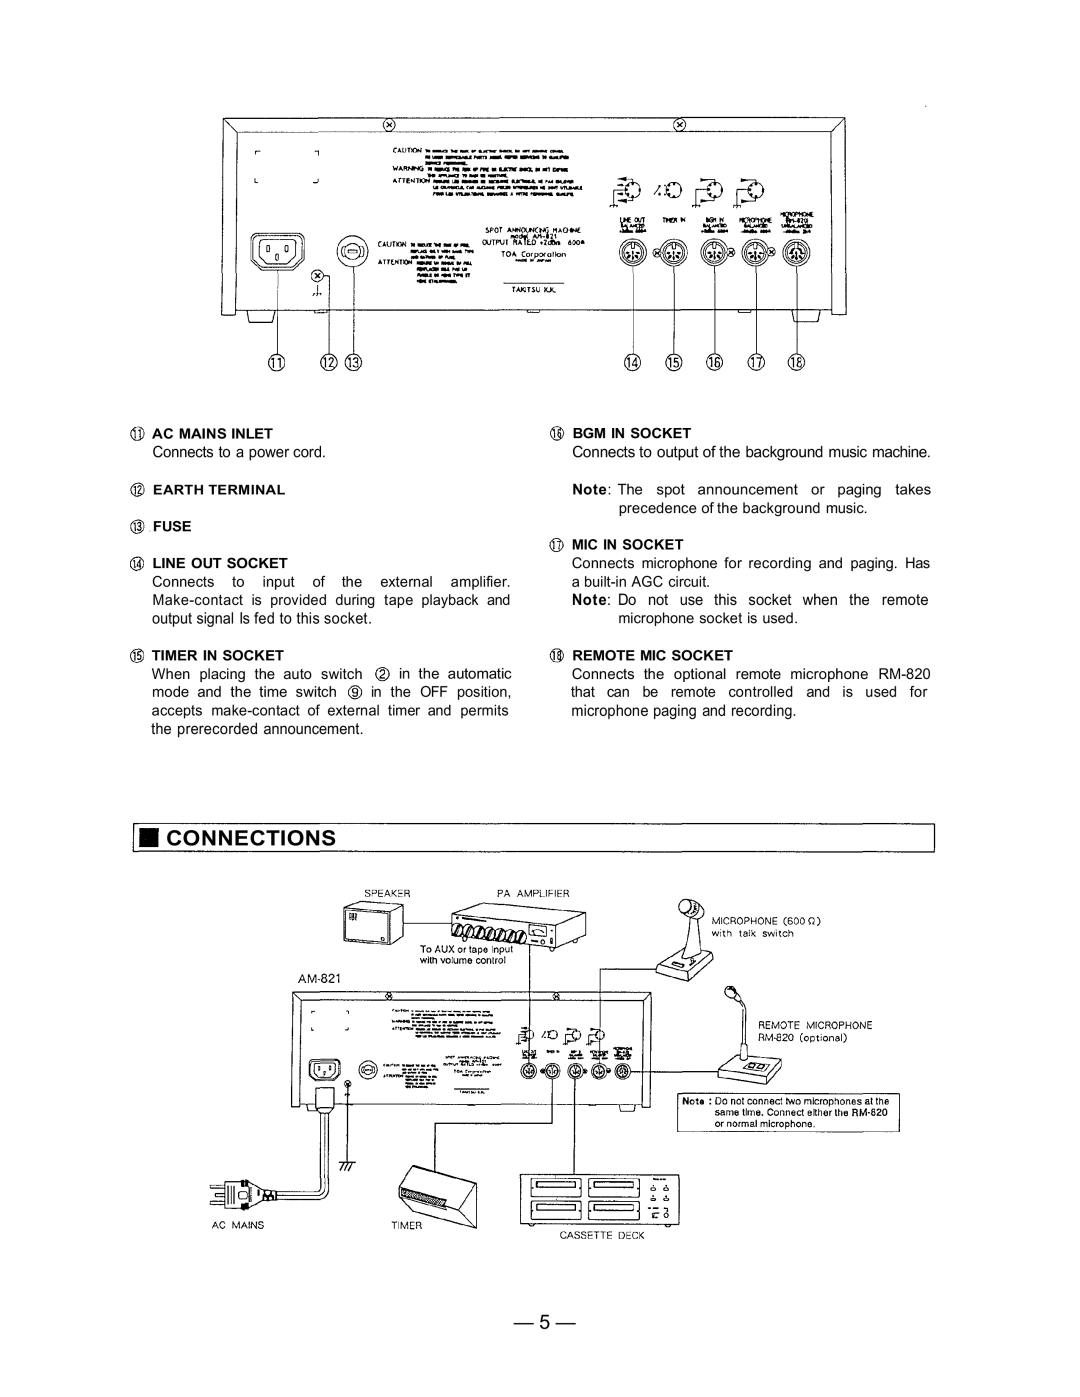 TOA Electronics AM-821 instruction manual Connections, Connects to a power cord, output signal Is fed to this socket 